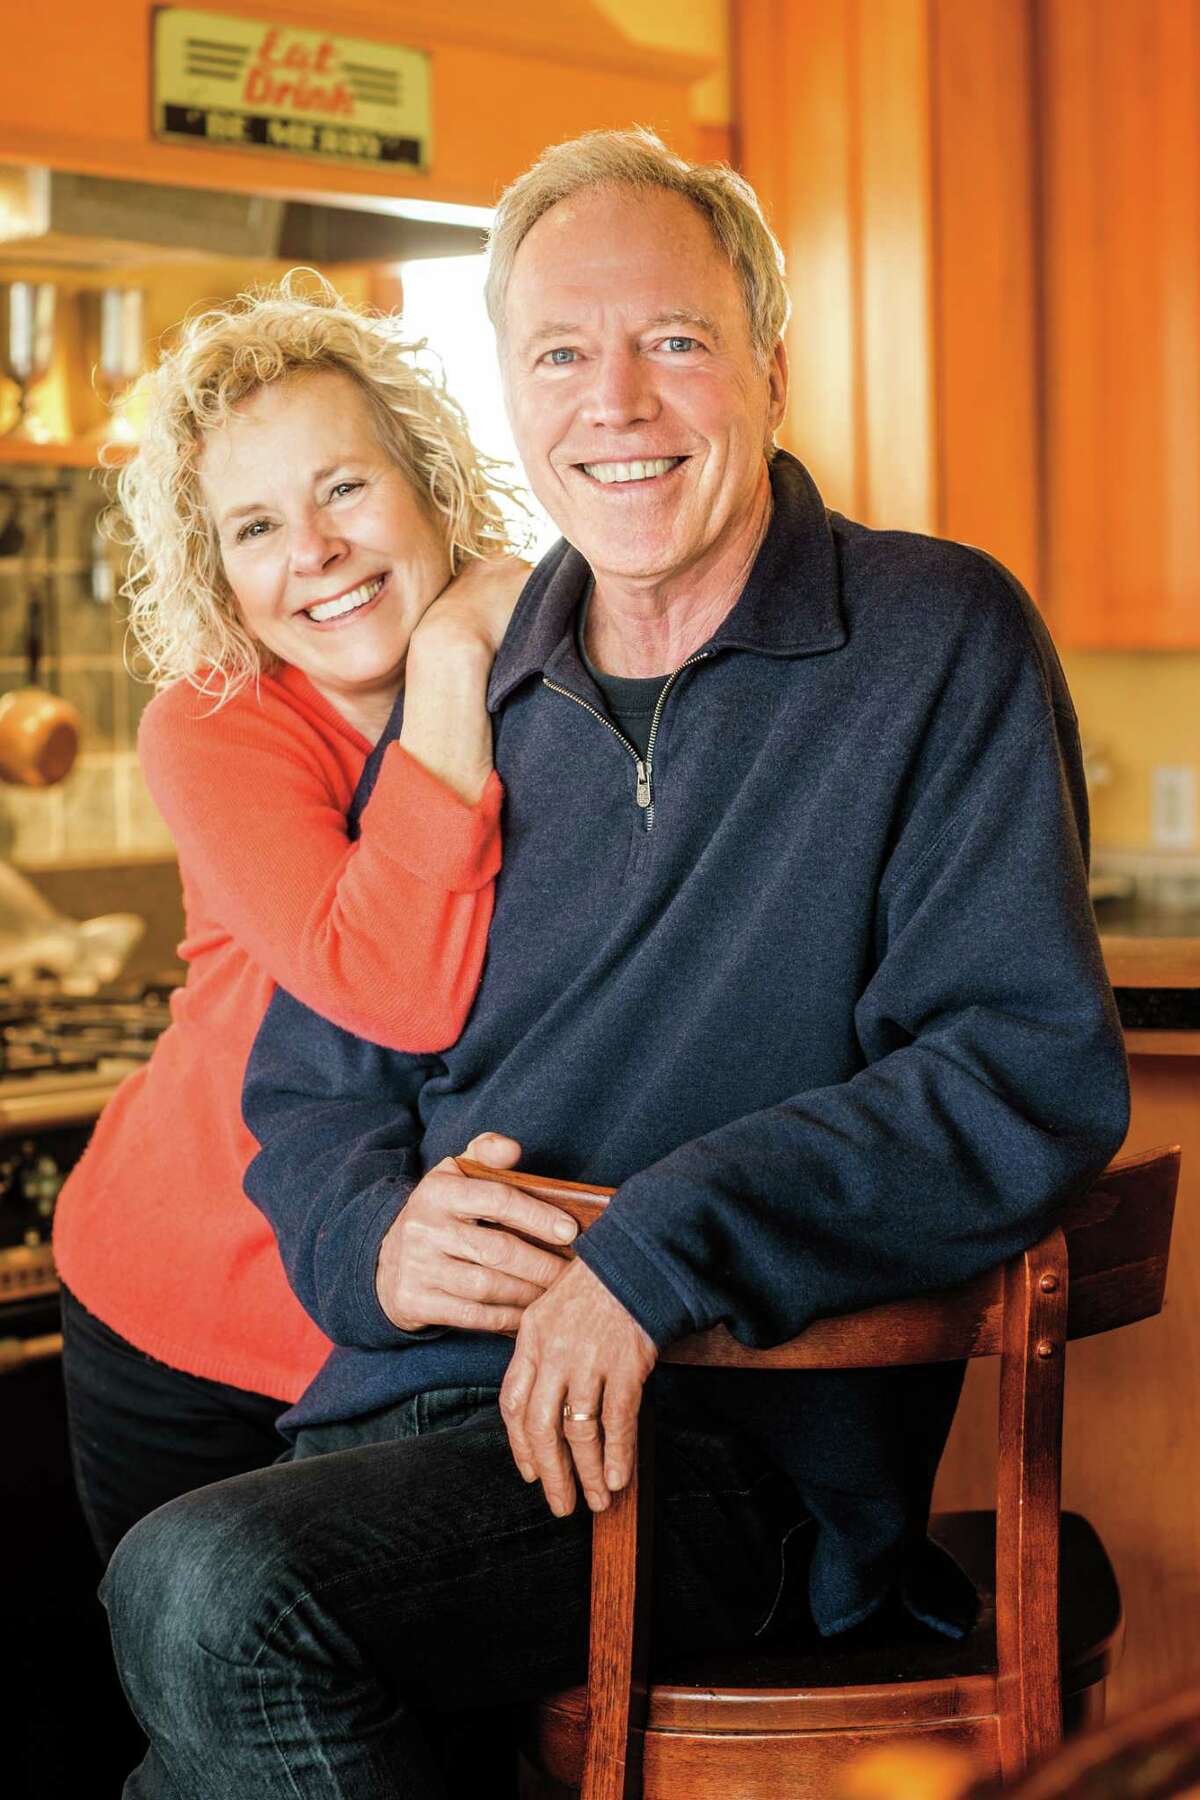 Mary Anne and Richard Erickson are the Hudson Valley couple behind "Feel Good Food." (Provided)